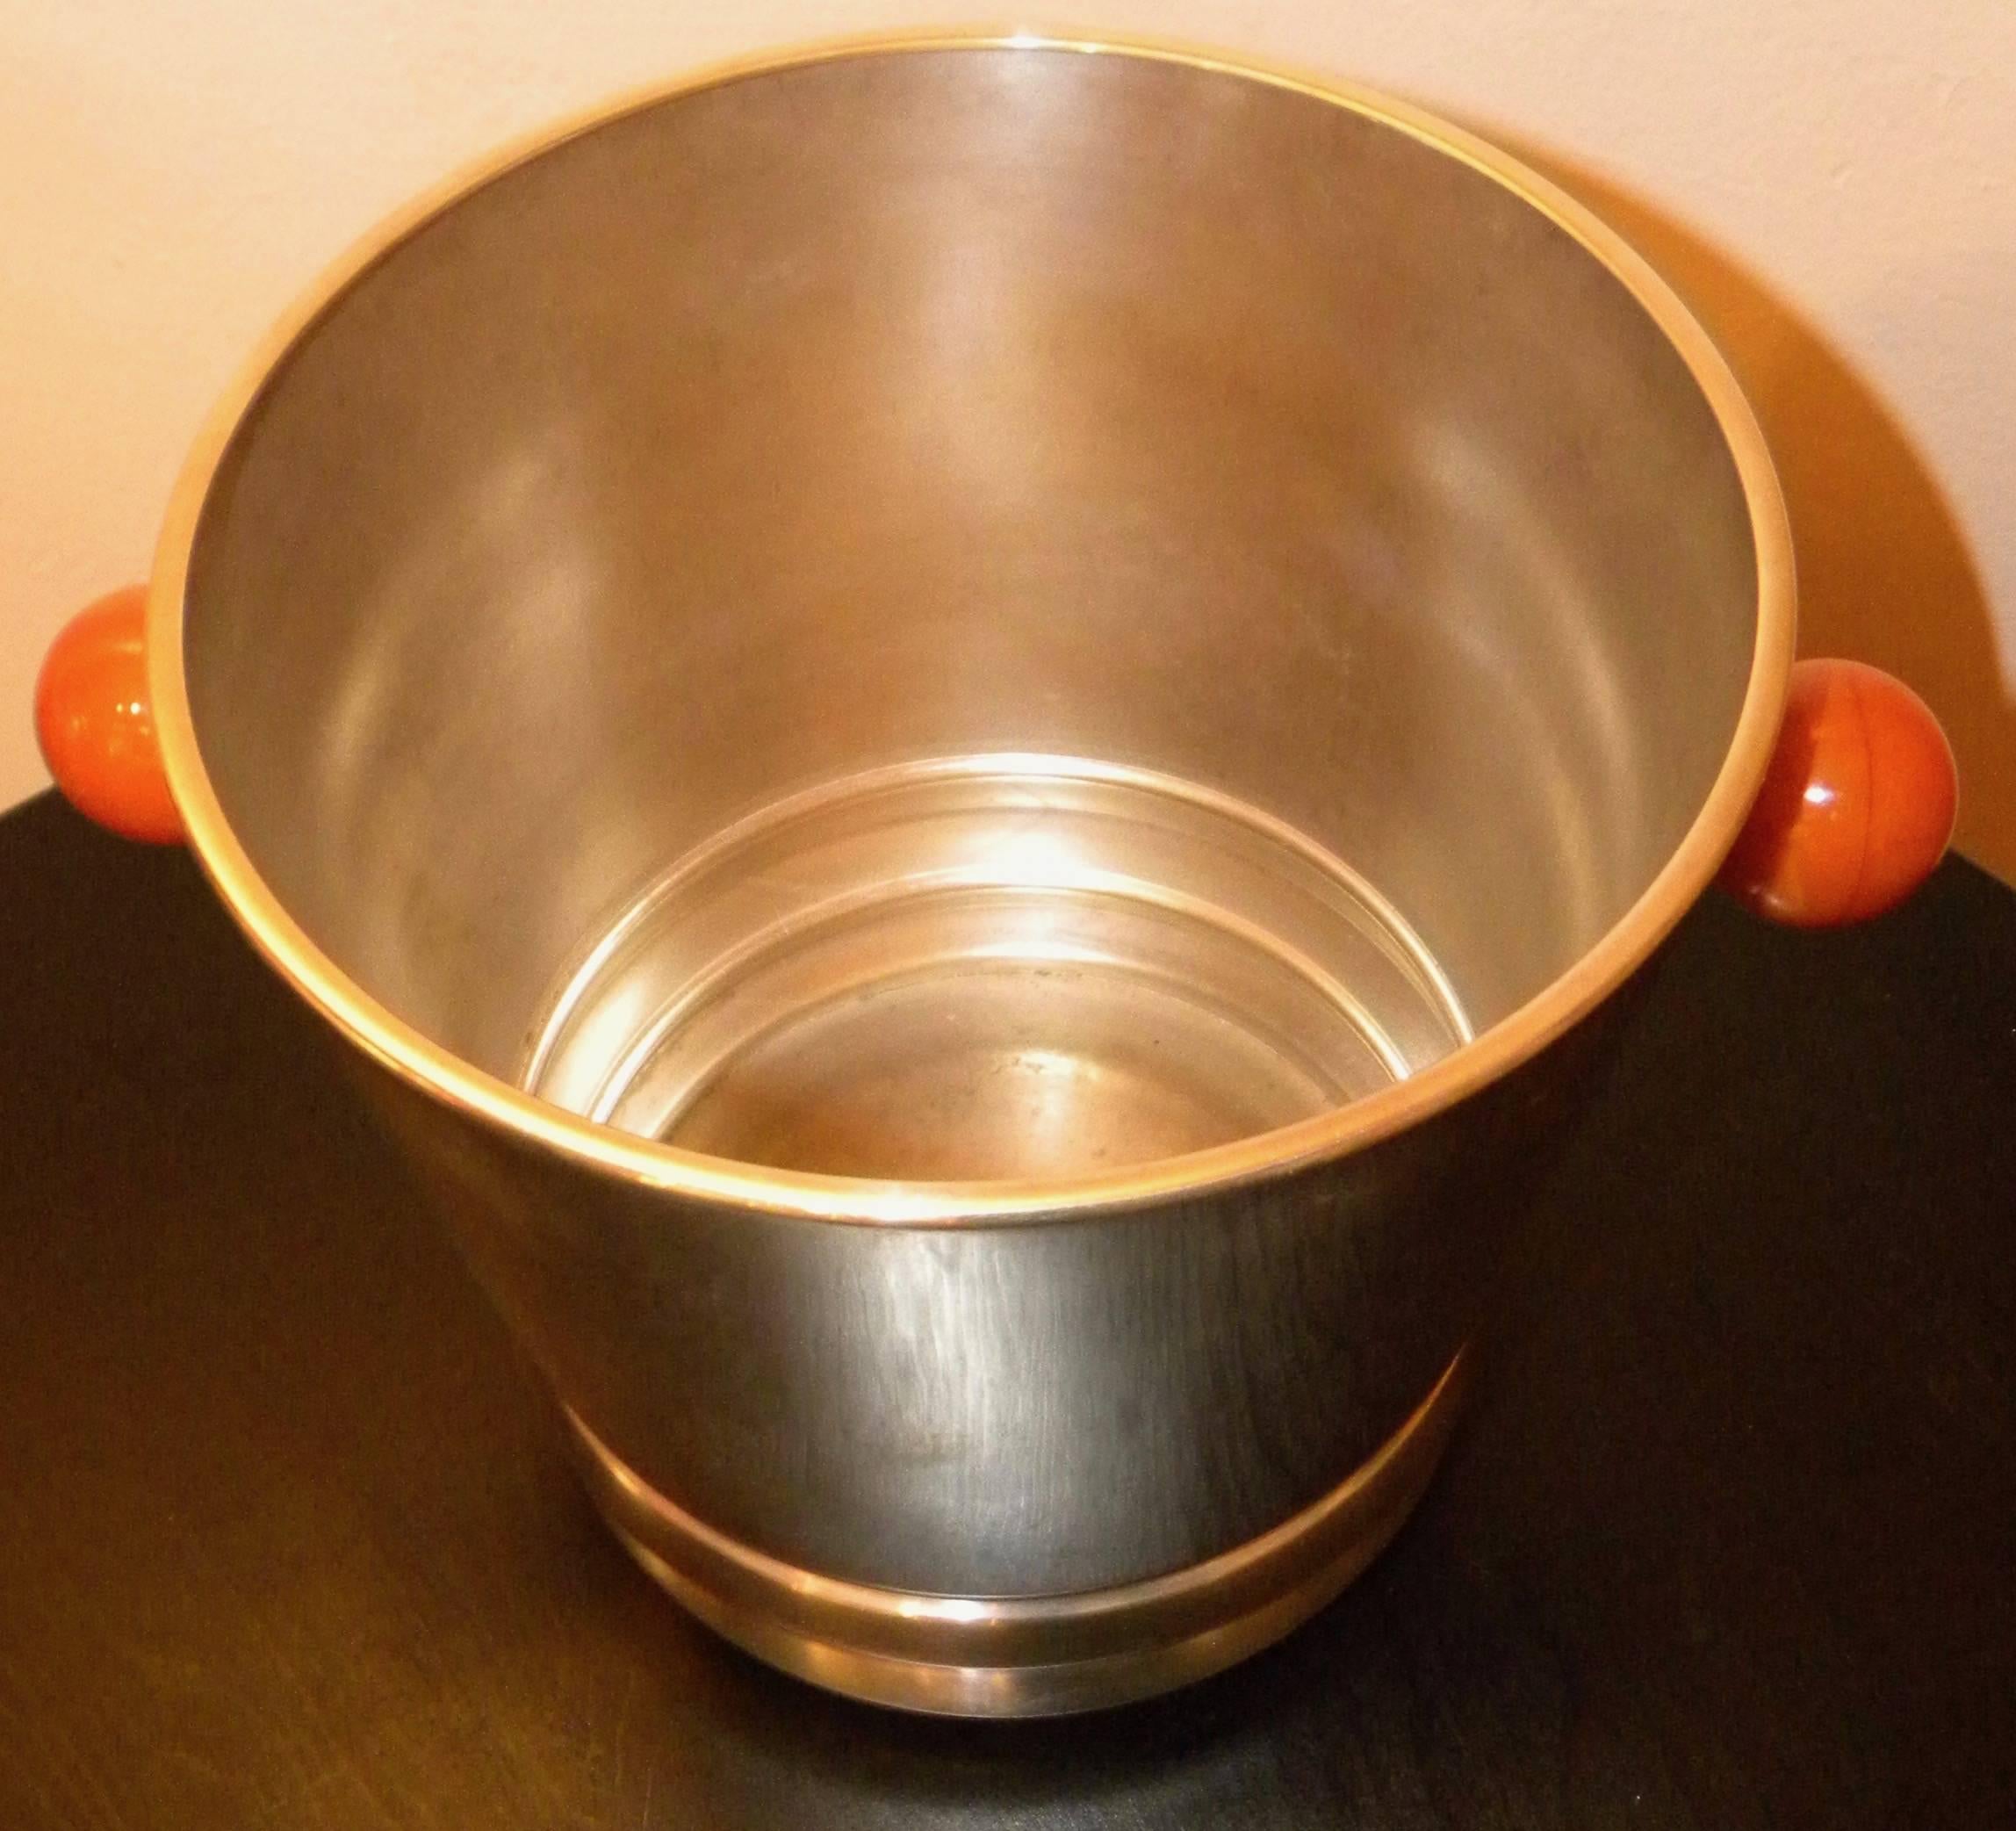 An Art Deco champagne cooler/ice bucket in heavy silver plate by Quist has a wonderful modernist style. The detachable Bakelite handles make a wonderfully decorative addition to the sleek design as does the stepped bottom of the piece. In excellent